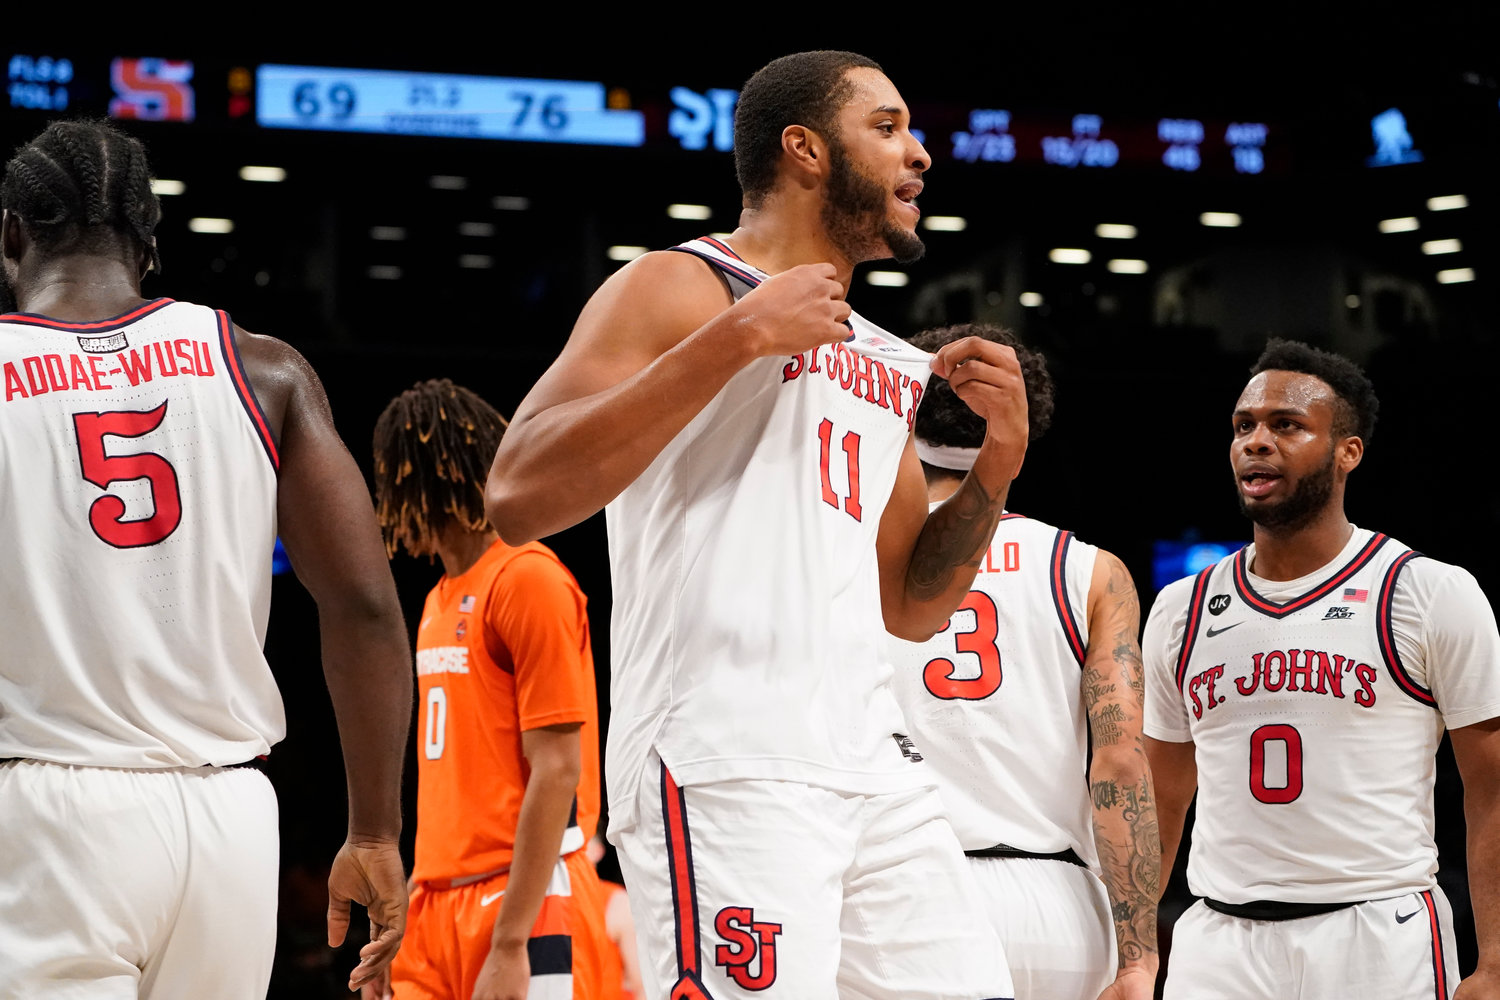 St. John's Joel Soriano (11) reacts toward Syracuse fans as his team takes the lead in overtime of the championship game at the Good Samaritan Empire Classic on Tuesday night in New York. St. John's won 76-69 in overtime.